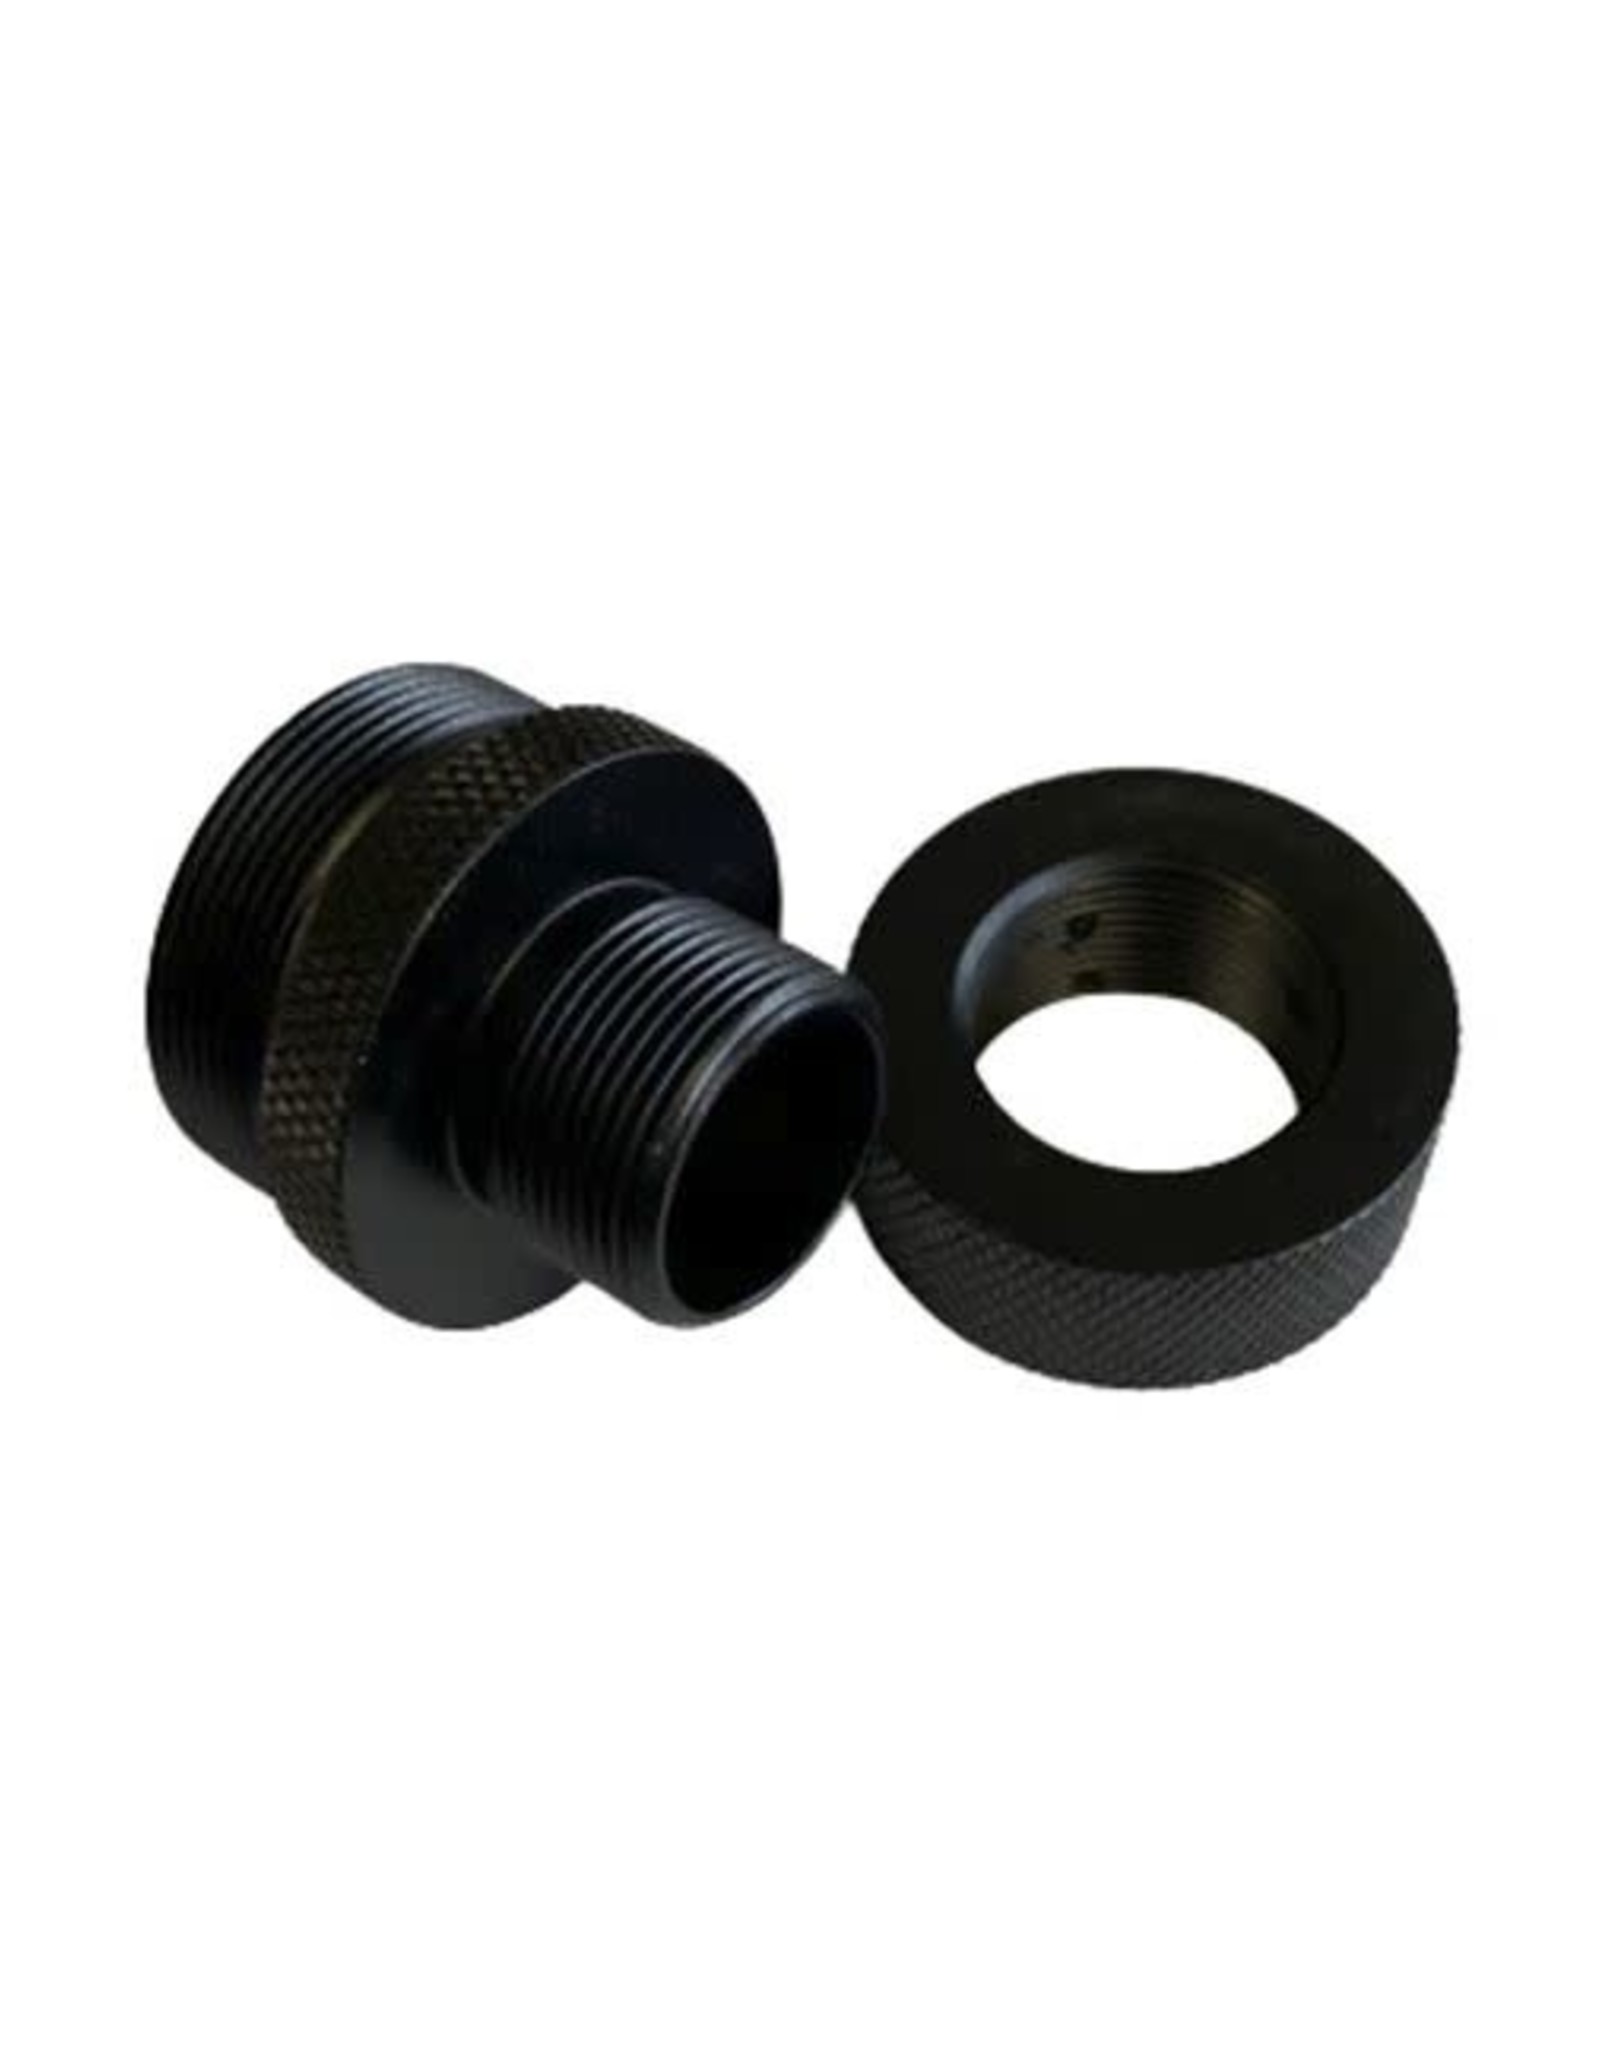 DonnyFL Rex-P M18 x 1 Adapter 27mm Thread - For older product